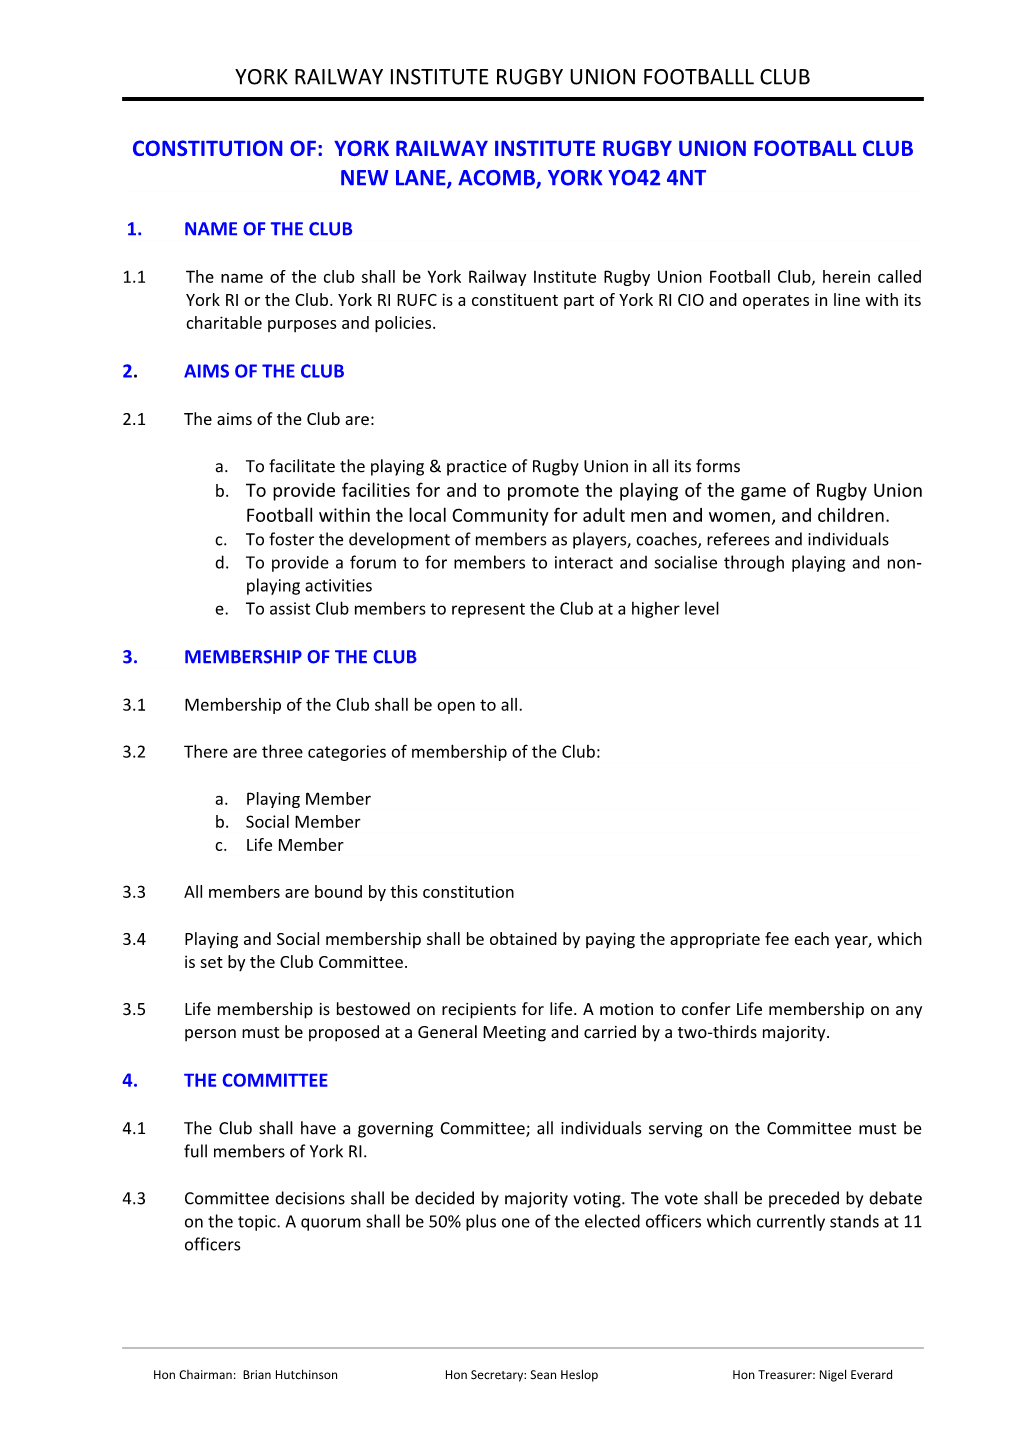 Constitution of Broadmoor Rugby Football Club